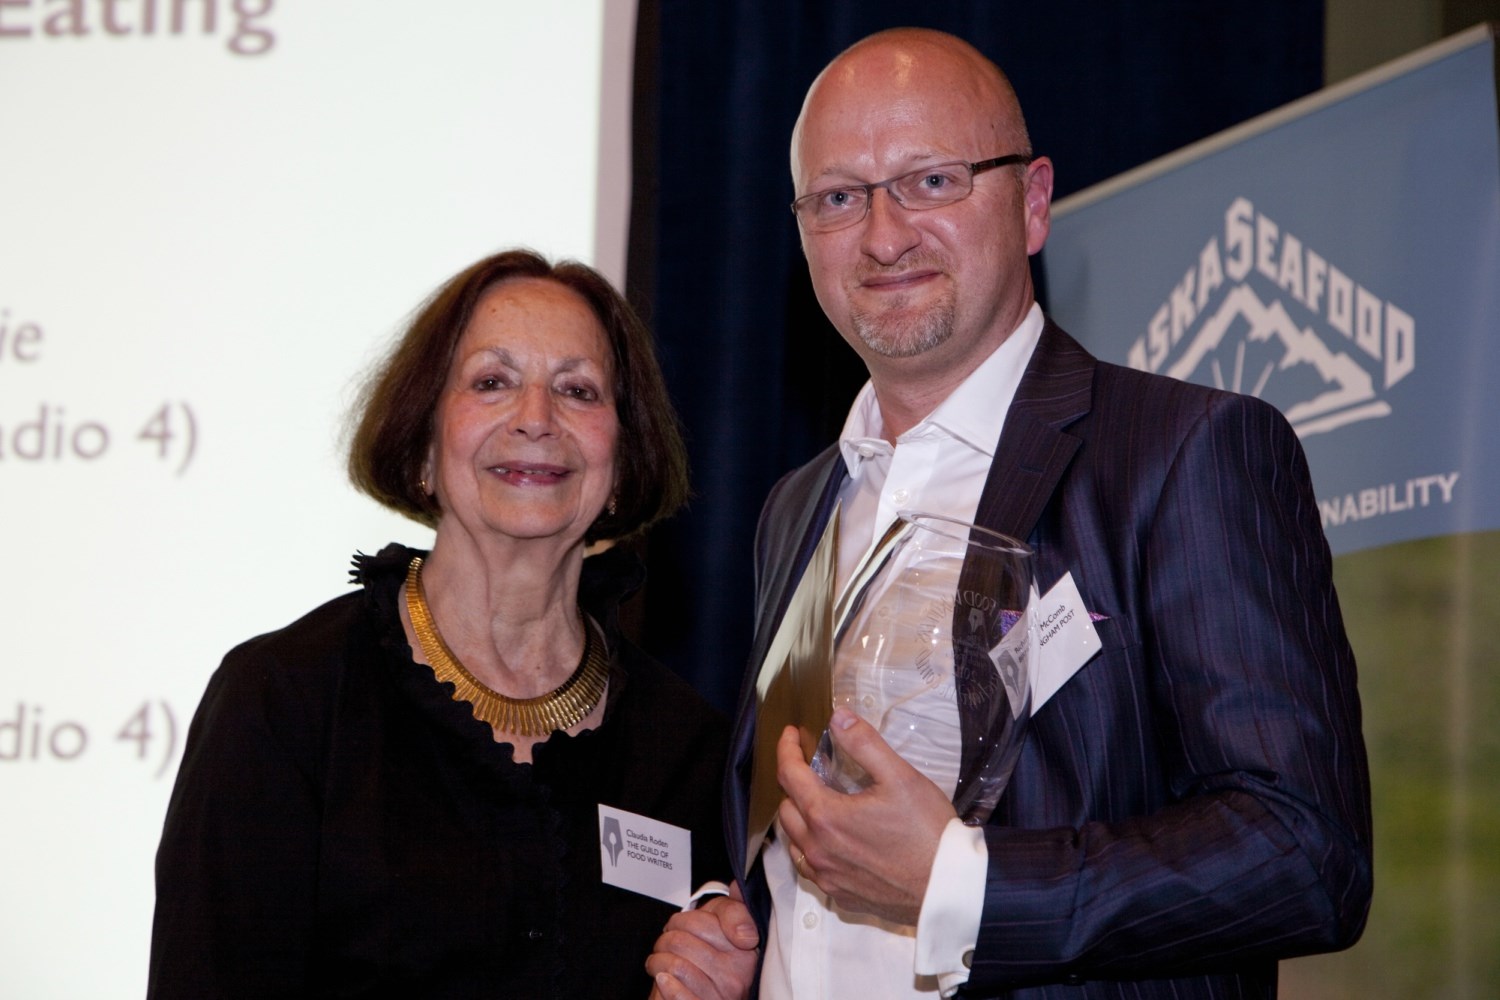 Claudia Roden presenting Richard McComb with the Michael Smith Award for Work on British Food